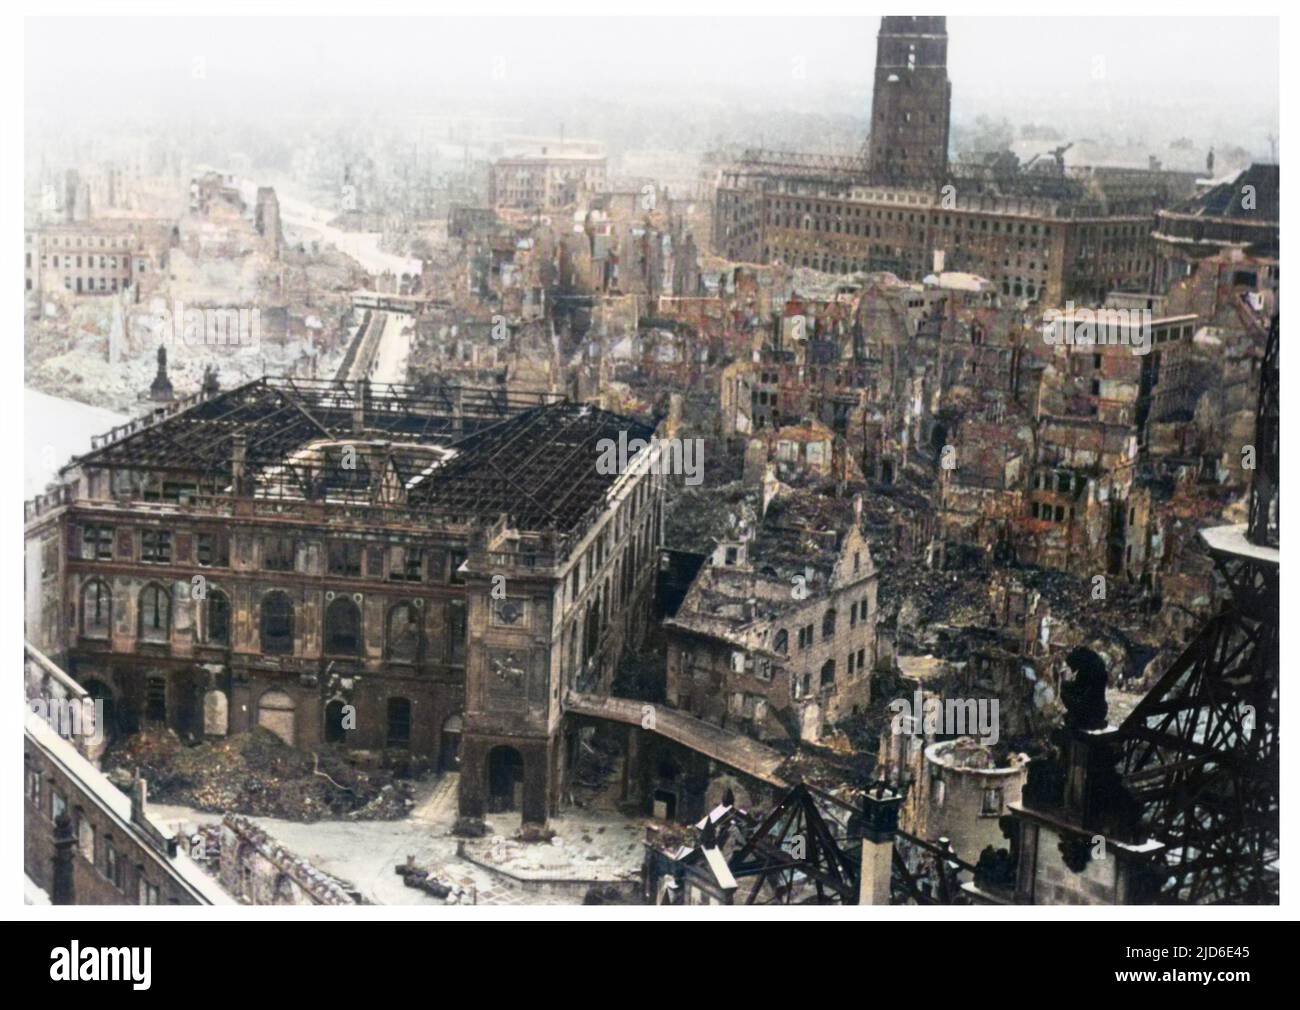 Dresden, devastated after the Allied bombing campaign had created a firestorm which burned for 7 days. Colourised version of : 10078363       Date: 13-15 February 1945 Stock Photo